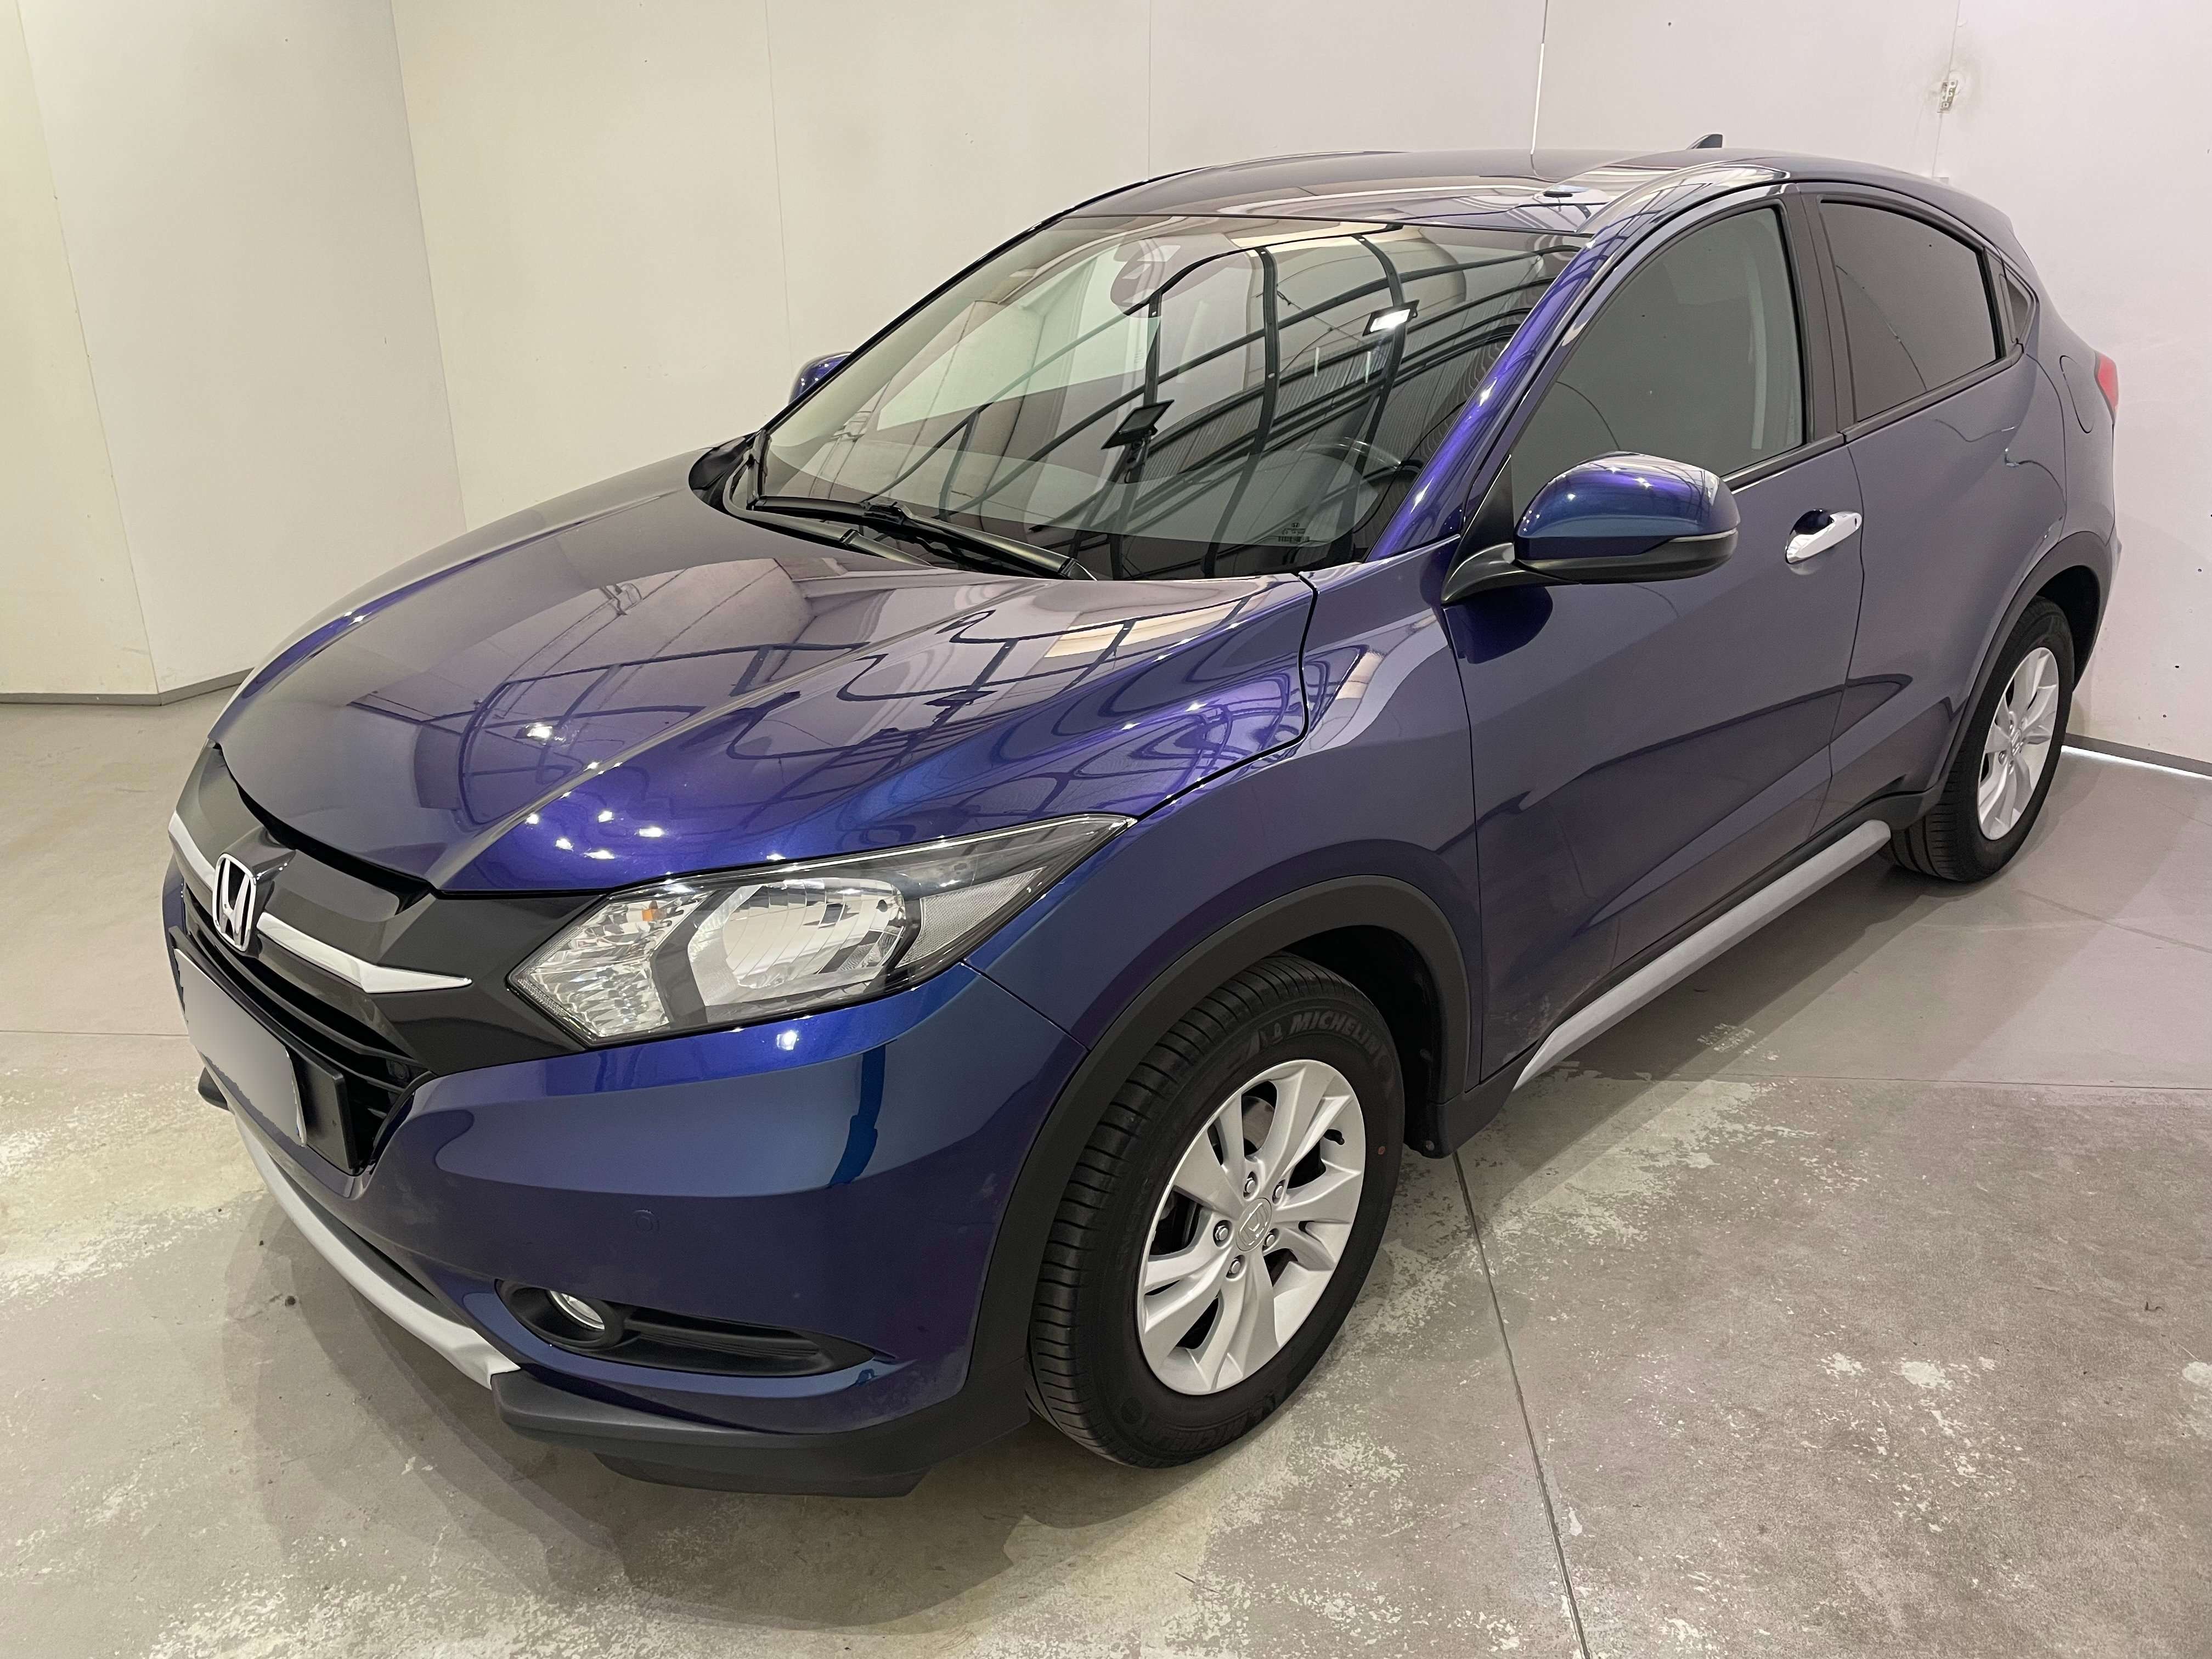 Honda HR-V Off-Road/Pick-up in Blue used in Cologno Monzese - Mi for € 12,900.-